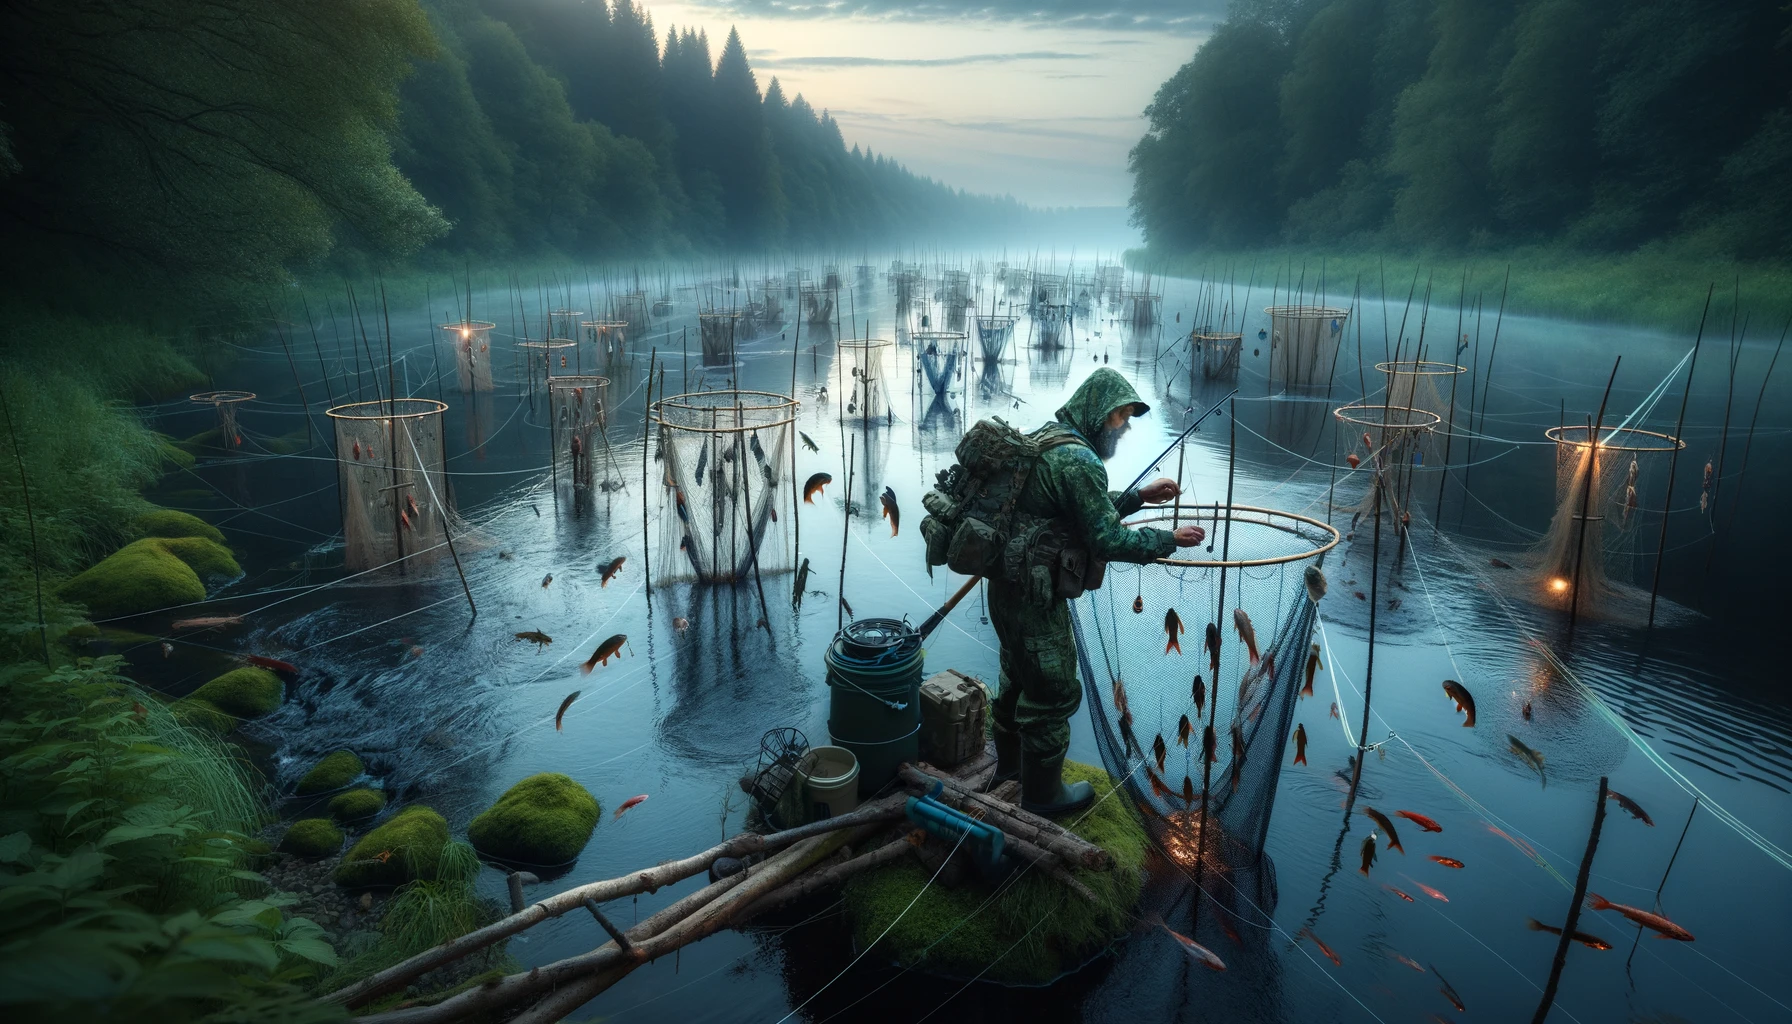 Prepper setting up a network of fishing nets and lines in a tranquil river at twilight, utilizing passive fishing strategies within a lush riverside forest, showcasing ingenuity and harmony with the natural environment for survival